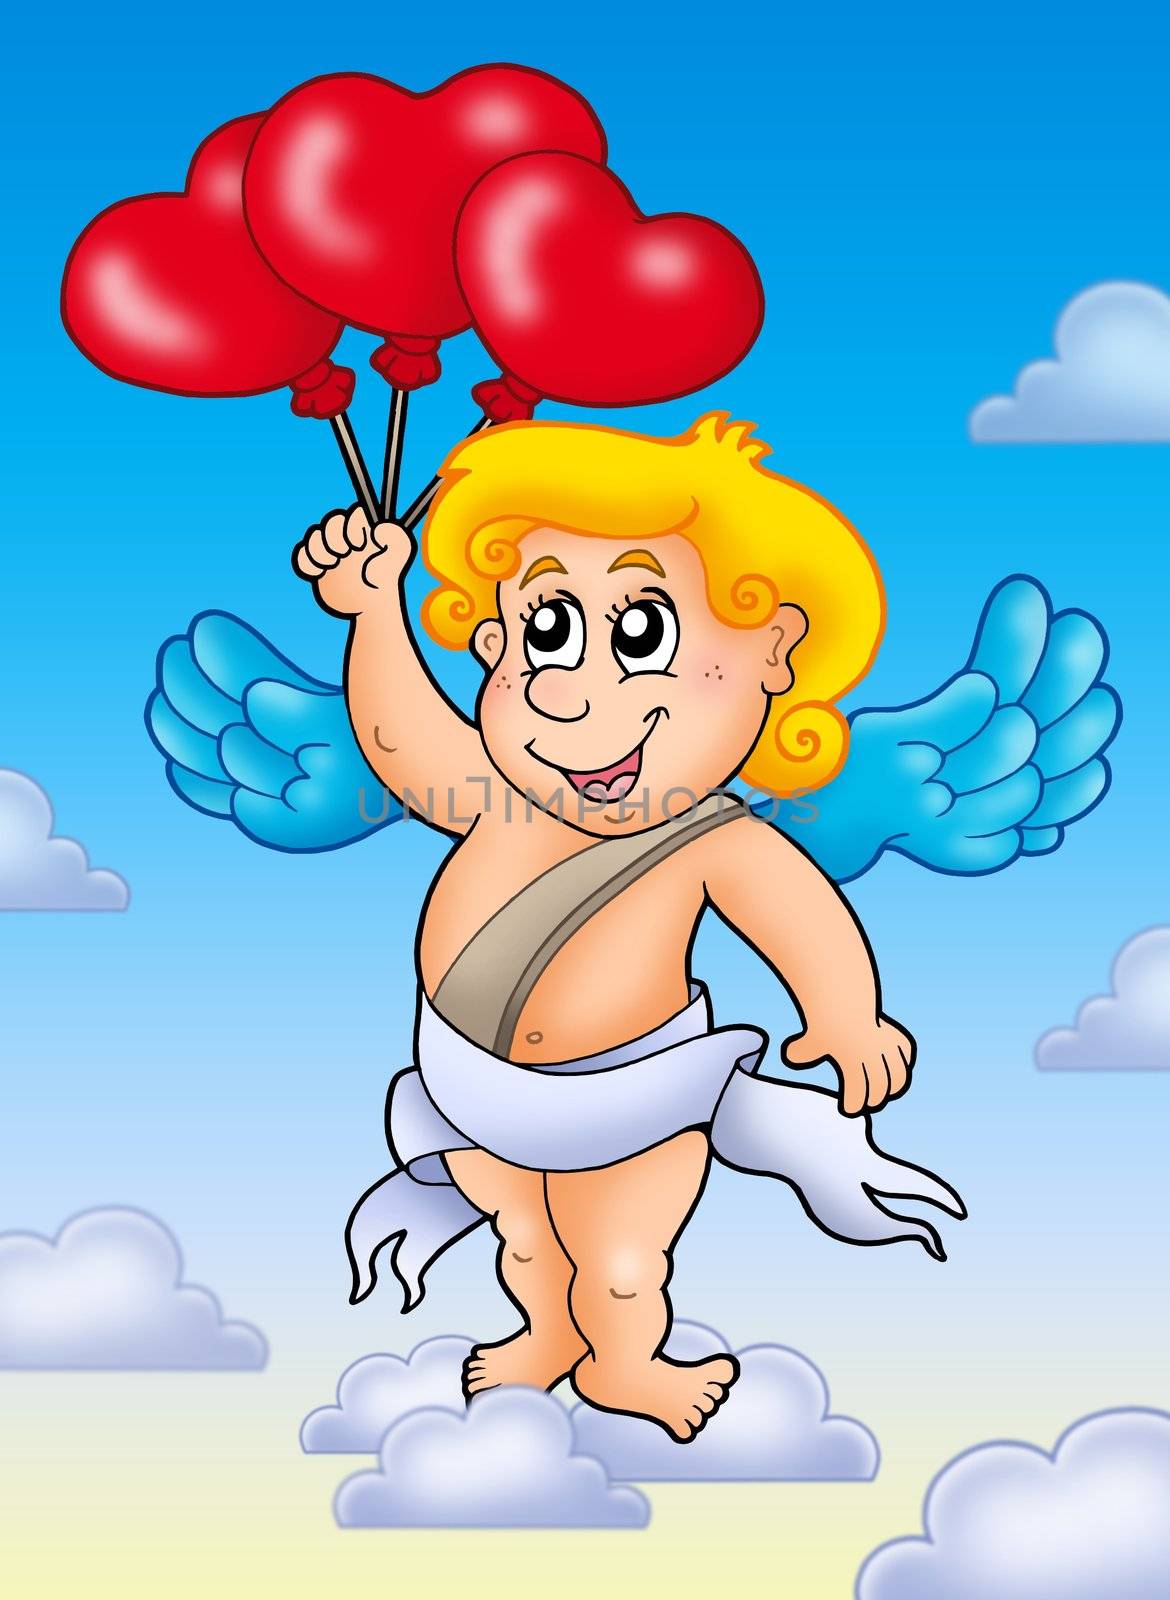 Cupid with balloons on blue sky - color illustration.